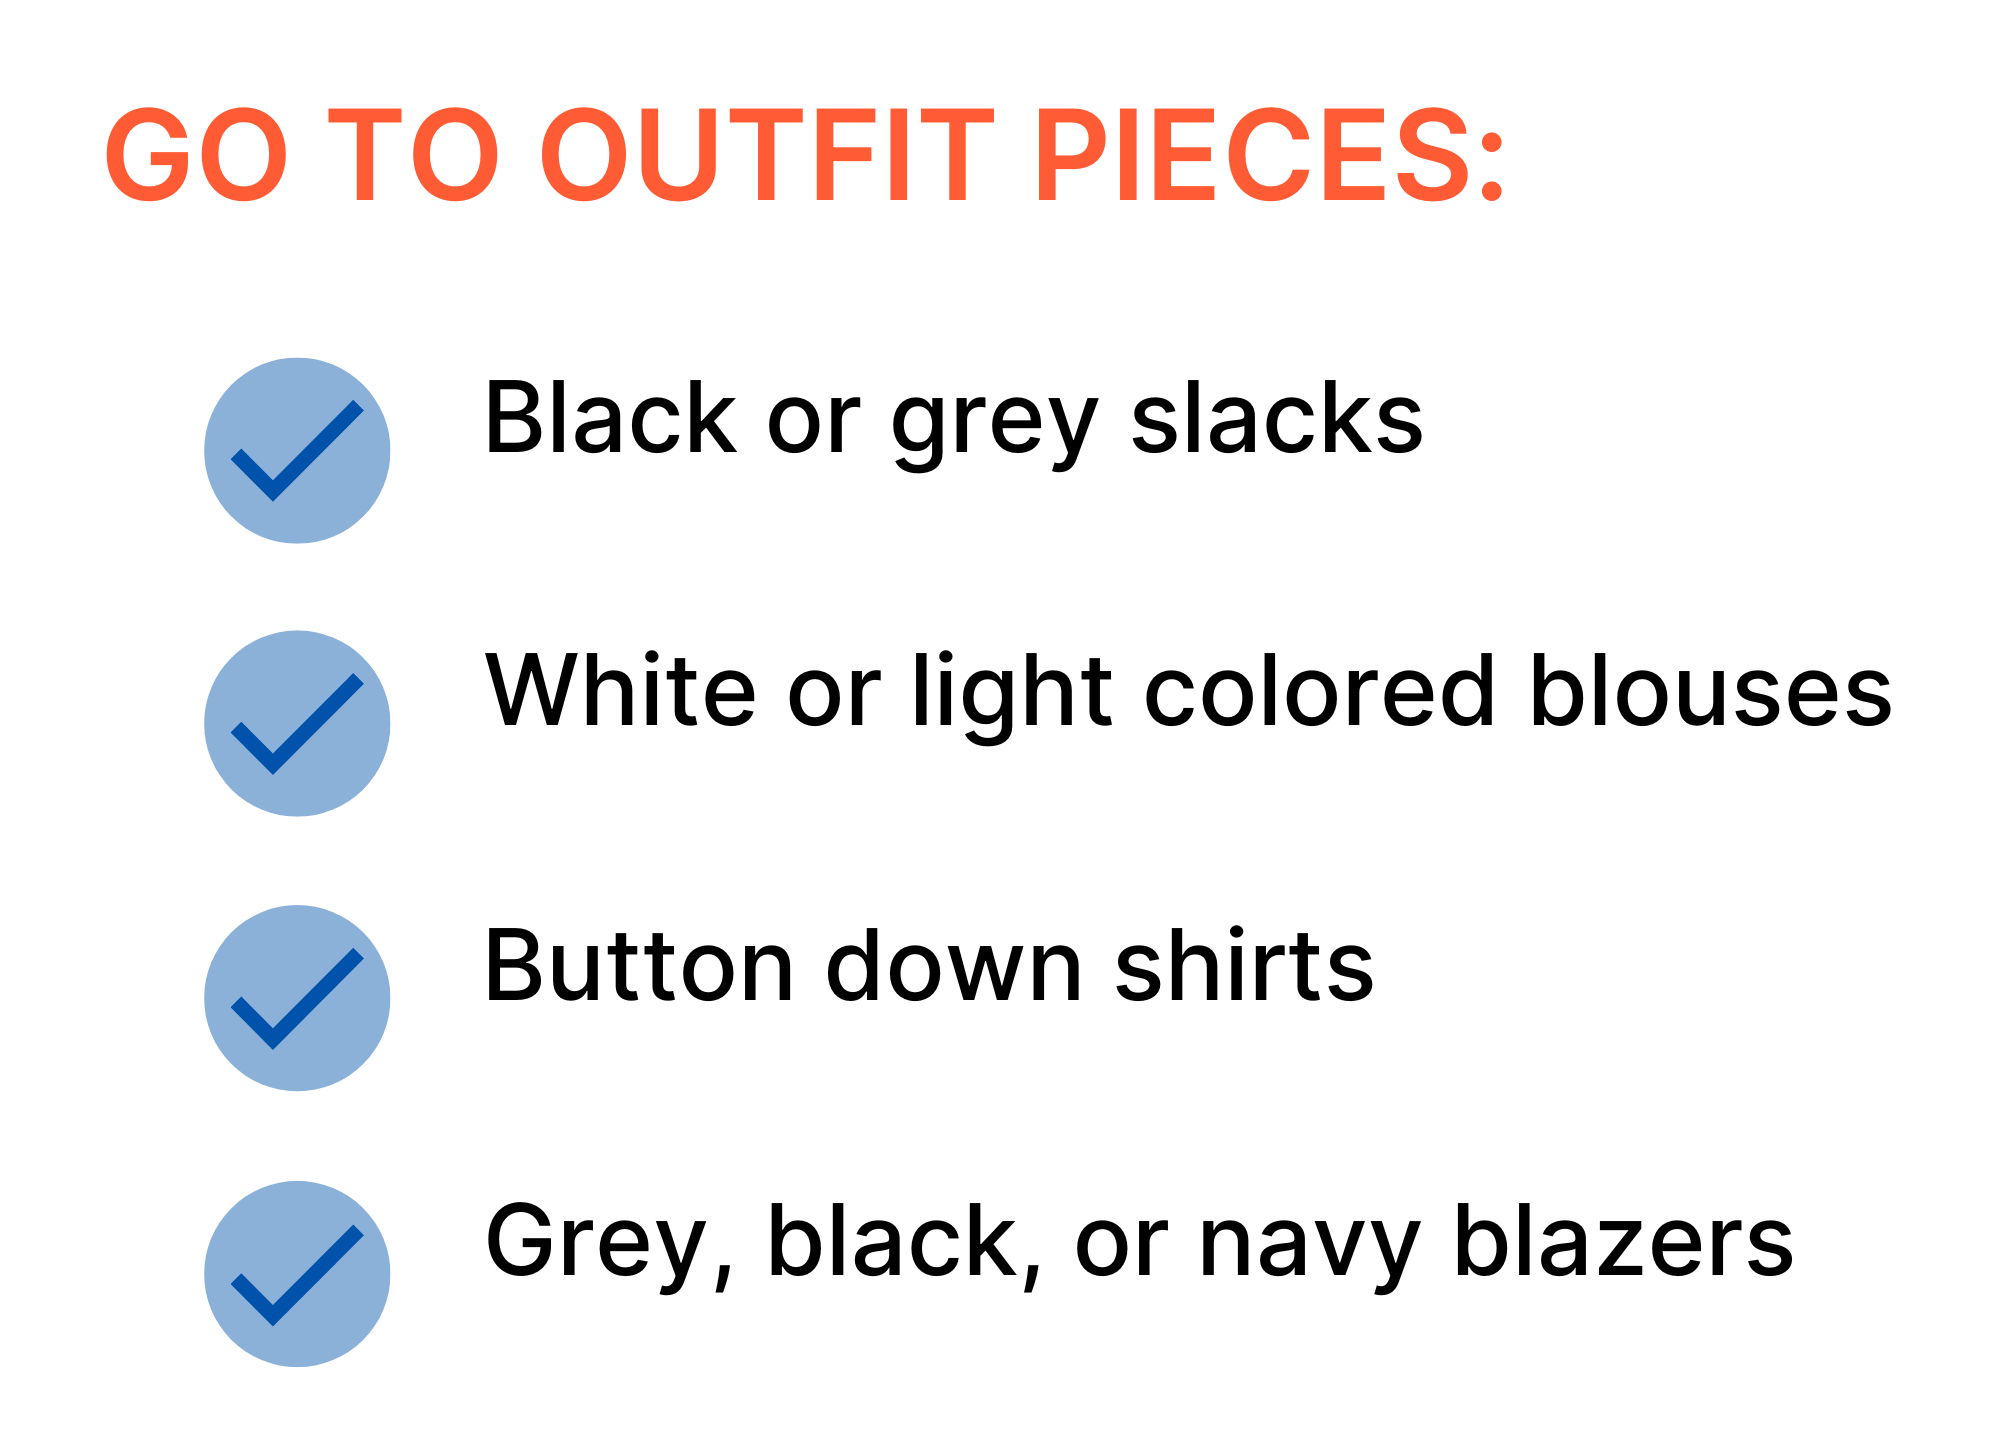 Four light blue bullet points with check marks state go to outfit pieces. Text next to the bullets state: black or grey slacks, white or light colored blouses, button own shirts, and grey, black, or navy blazers.